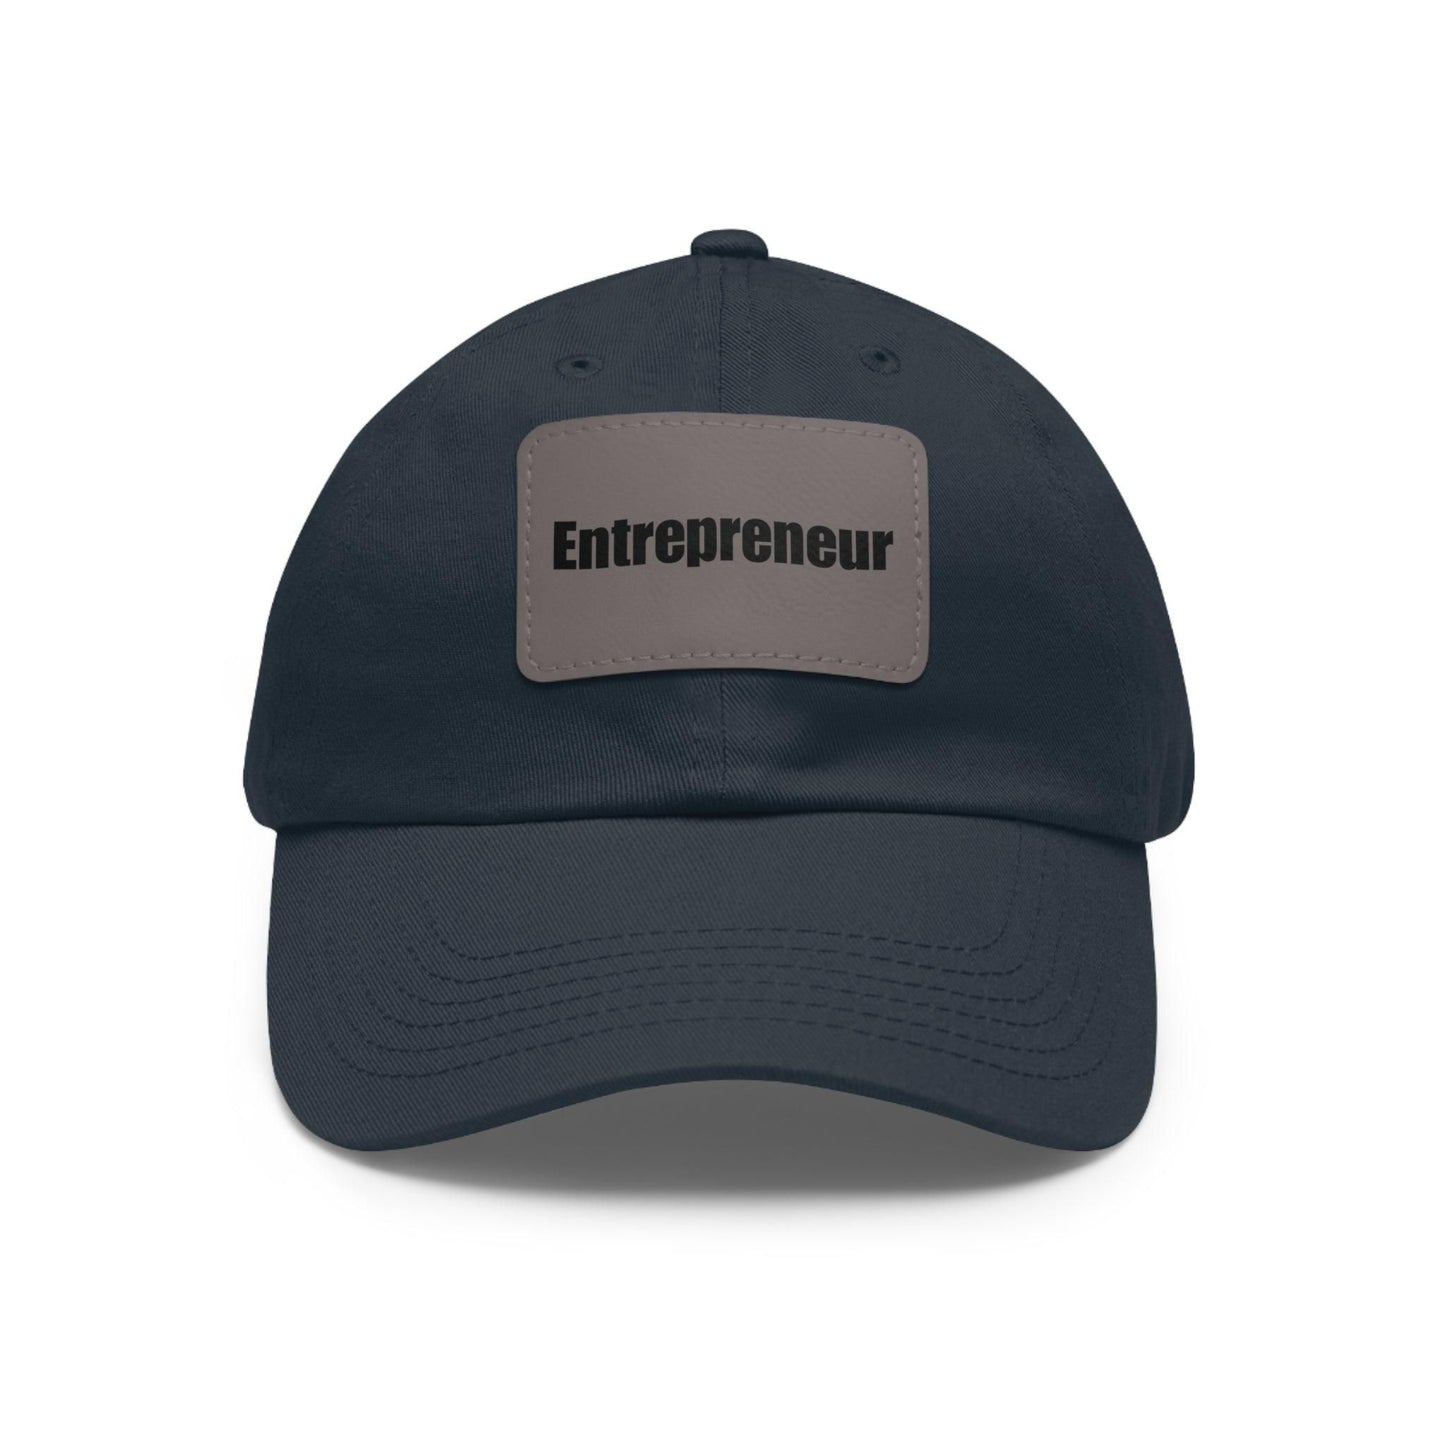 Entrepreneur Baseball Hat with Leather Patch Cap Navy / Grey patch Rectangle One size